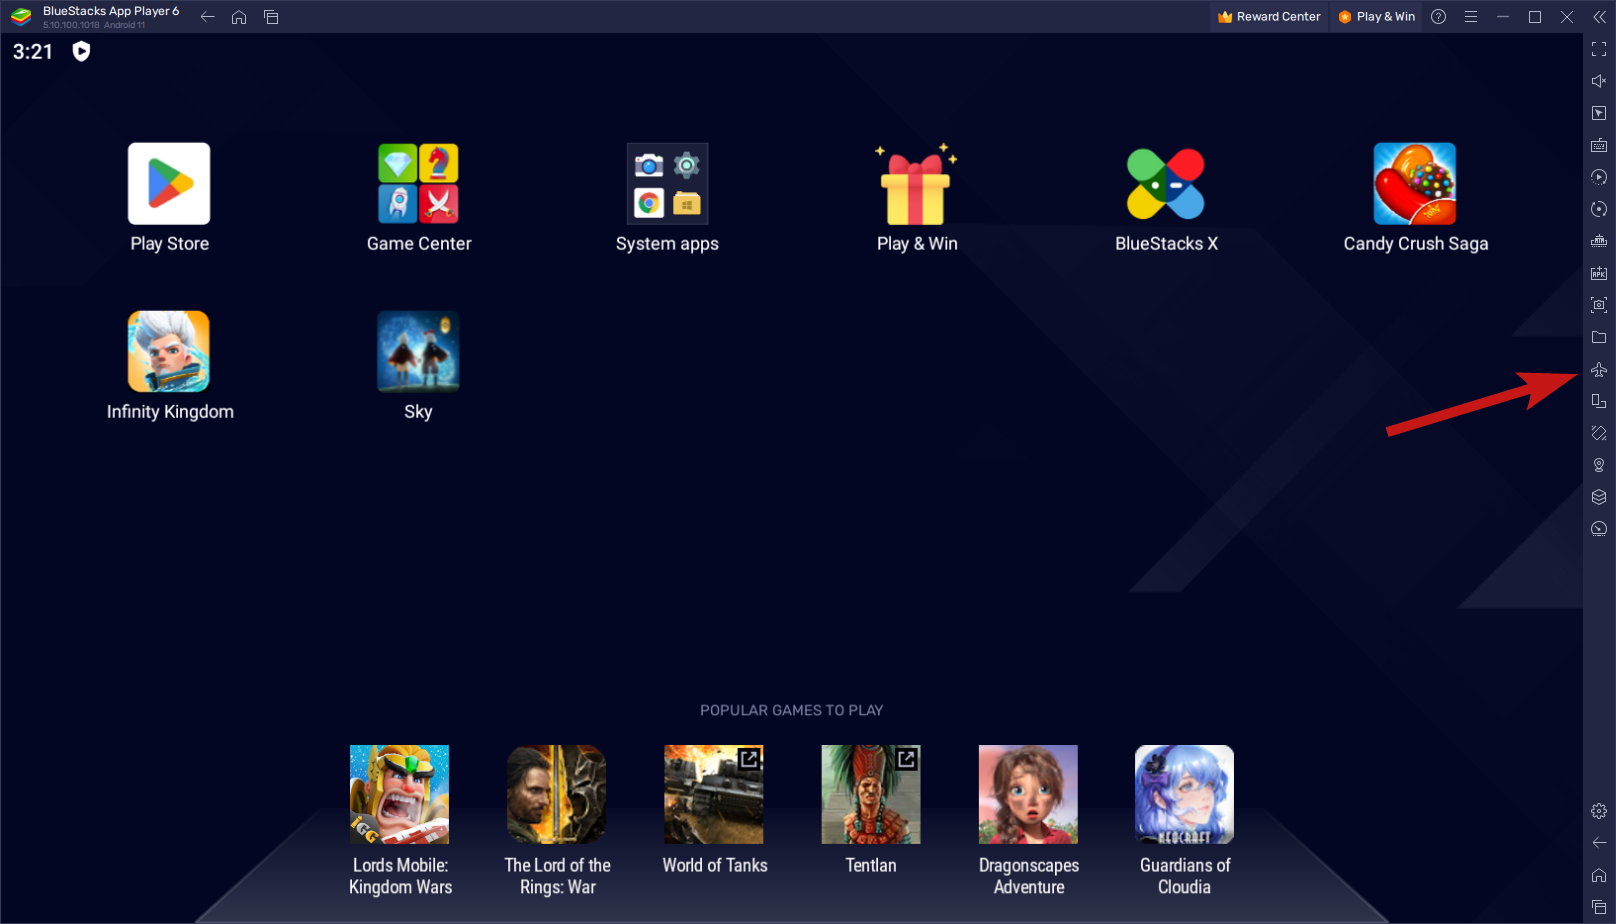 BlueStacks ‘Airplane Mode’ is Here To Give an Uninterrupted Mobile Gaming Experience